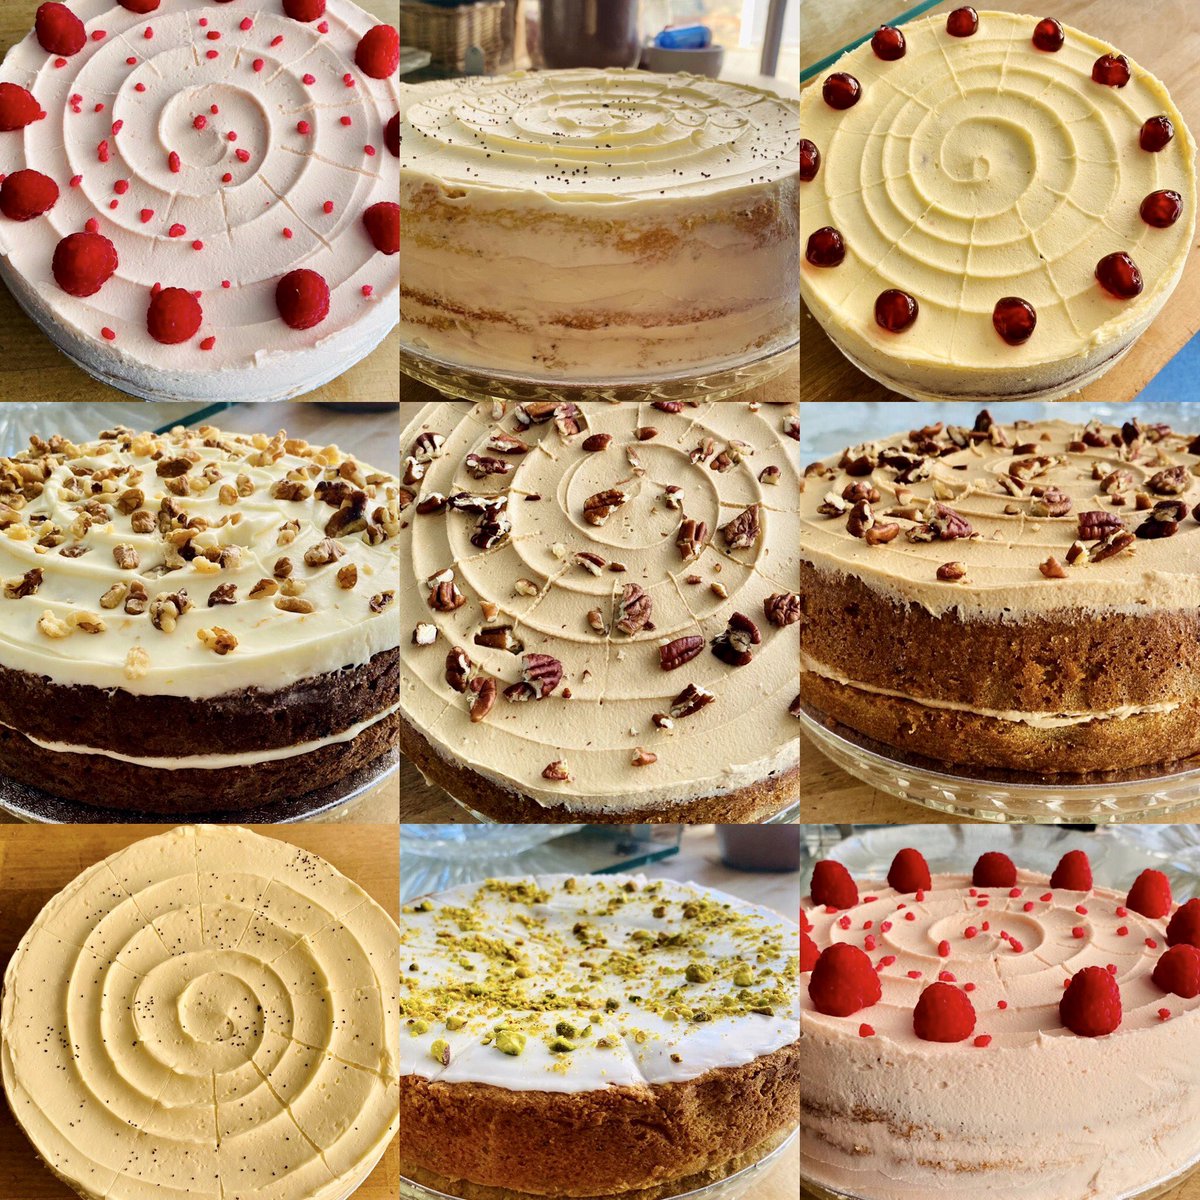 All stocked up again with delicious, local, gluten-free cakes including chocolate & hazelnut and lime & pistachio. #Whitstable #glutenfree #cakes